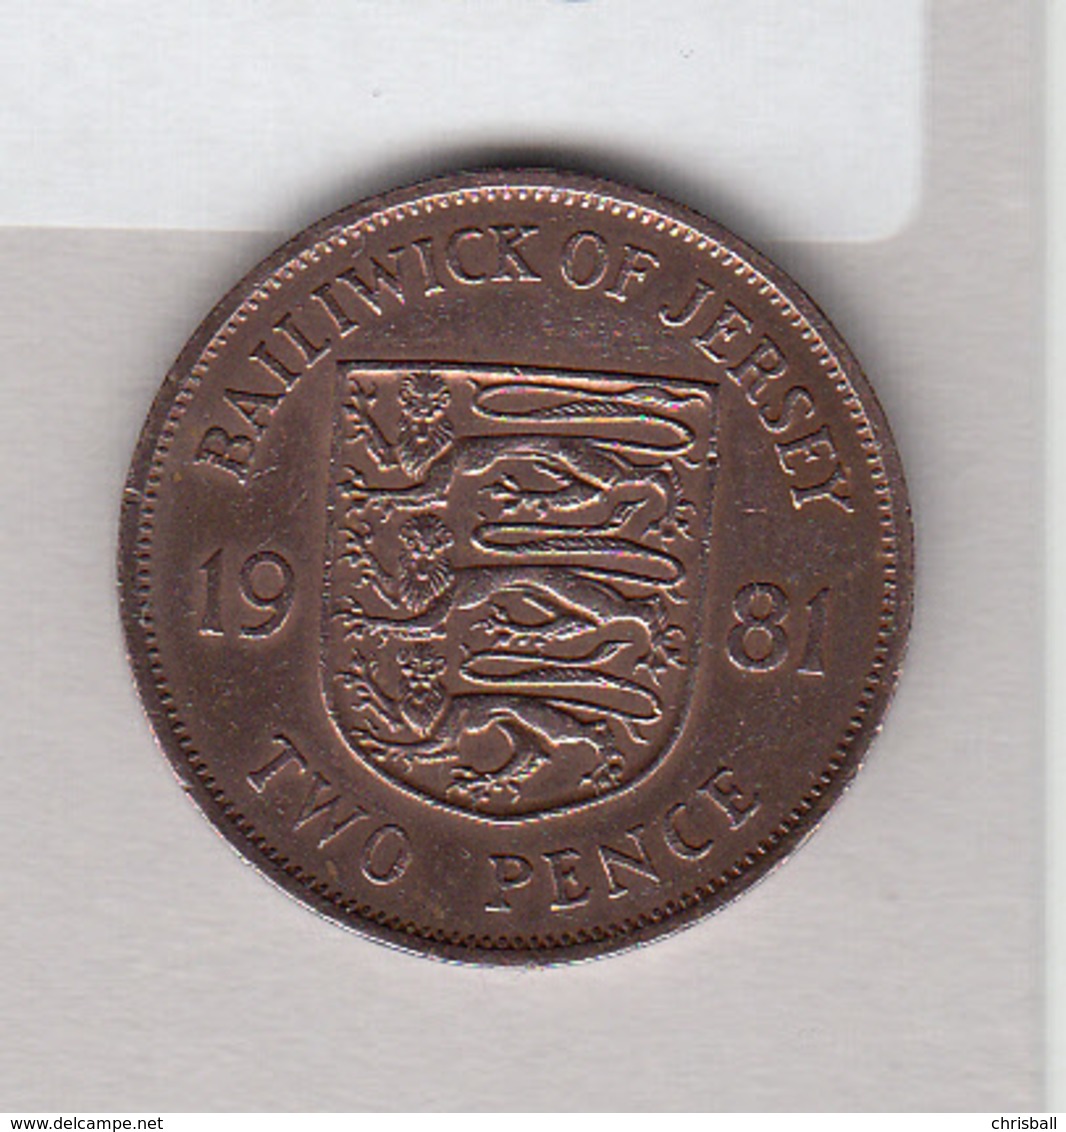 Jersey 1981 2p Coin (Low Mintage 50K) - Jersey